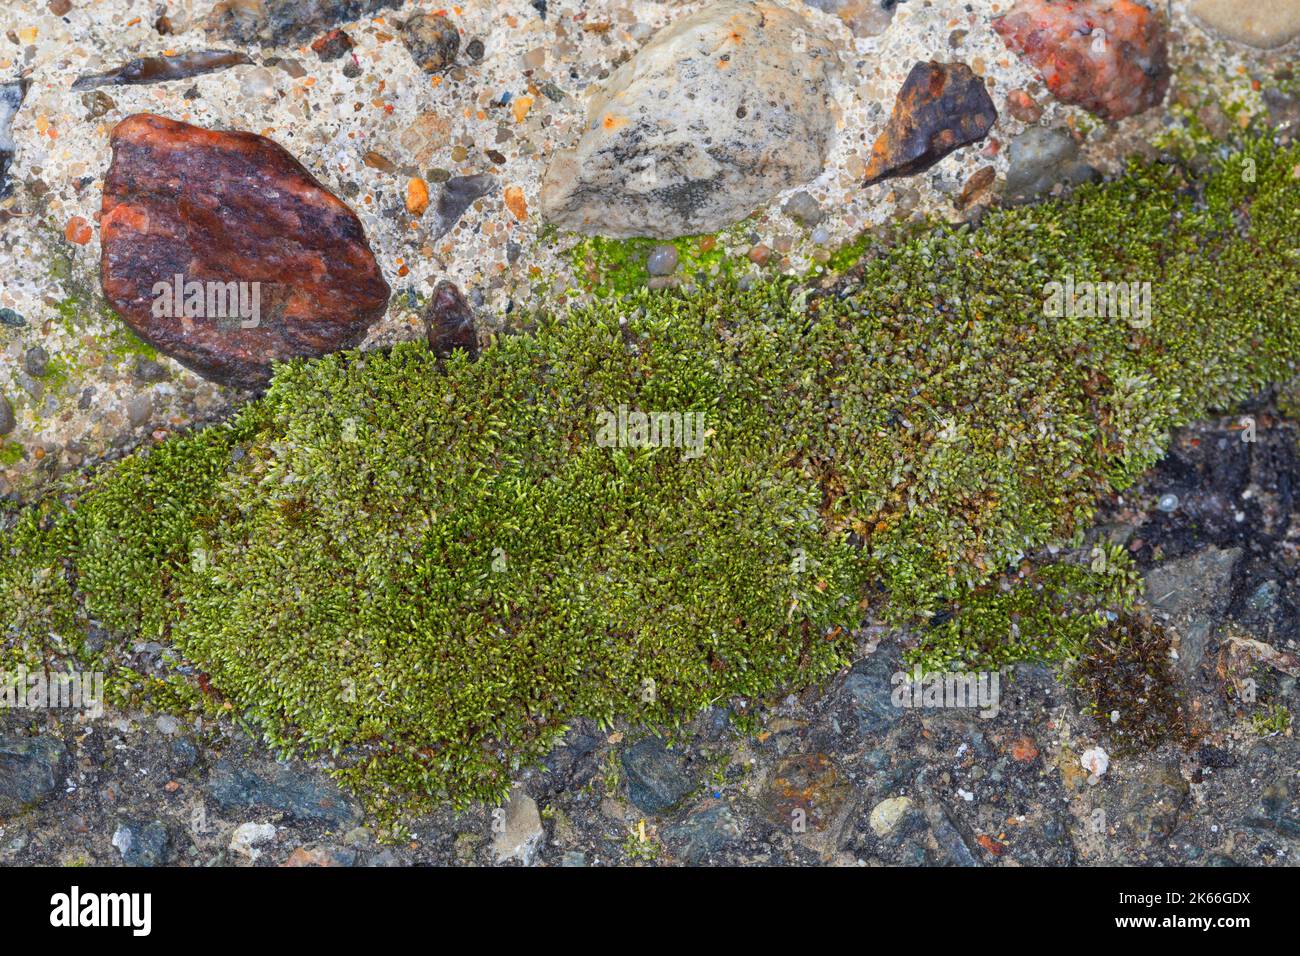 silvergreen bryum moss, silvery thread moss (Bryum argenteum), growing in the gaps concrete coping slabs, Germany Stock Photo